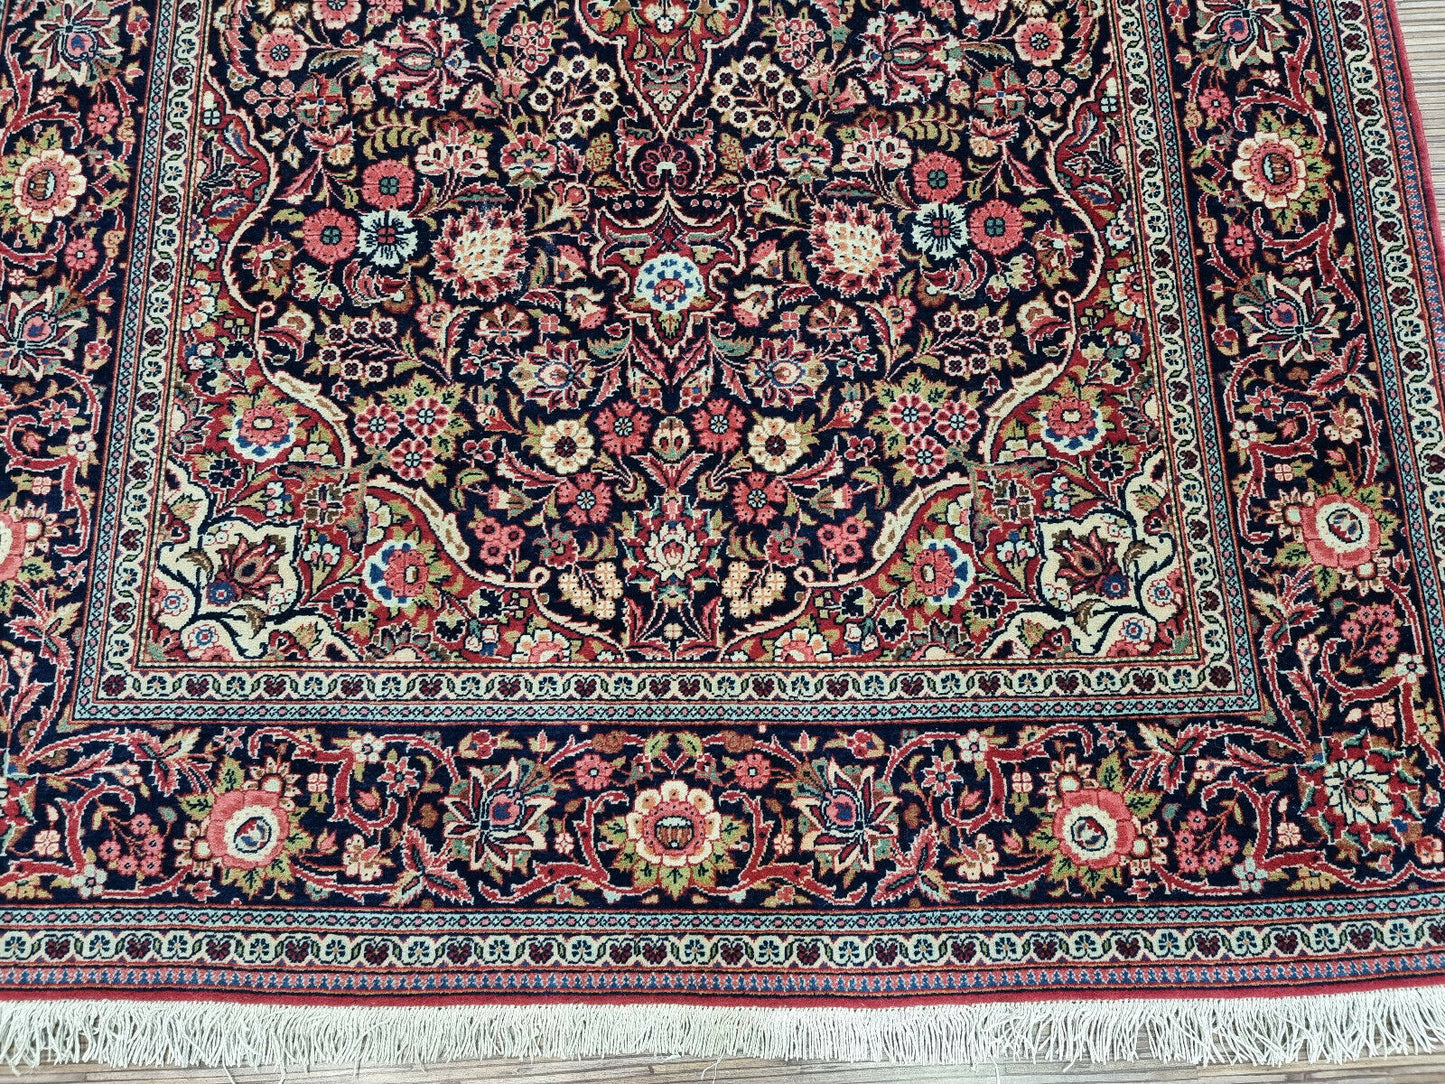 Close-up of geometric shapes on Handmade Antique Persian Kashan Rug - Detailed view showcasing the geometric shapes integrated into the rug's design.